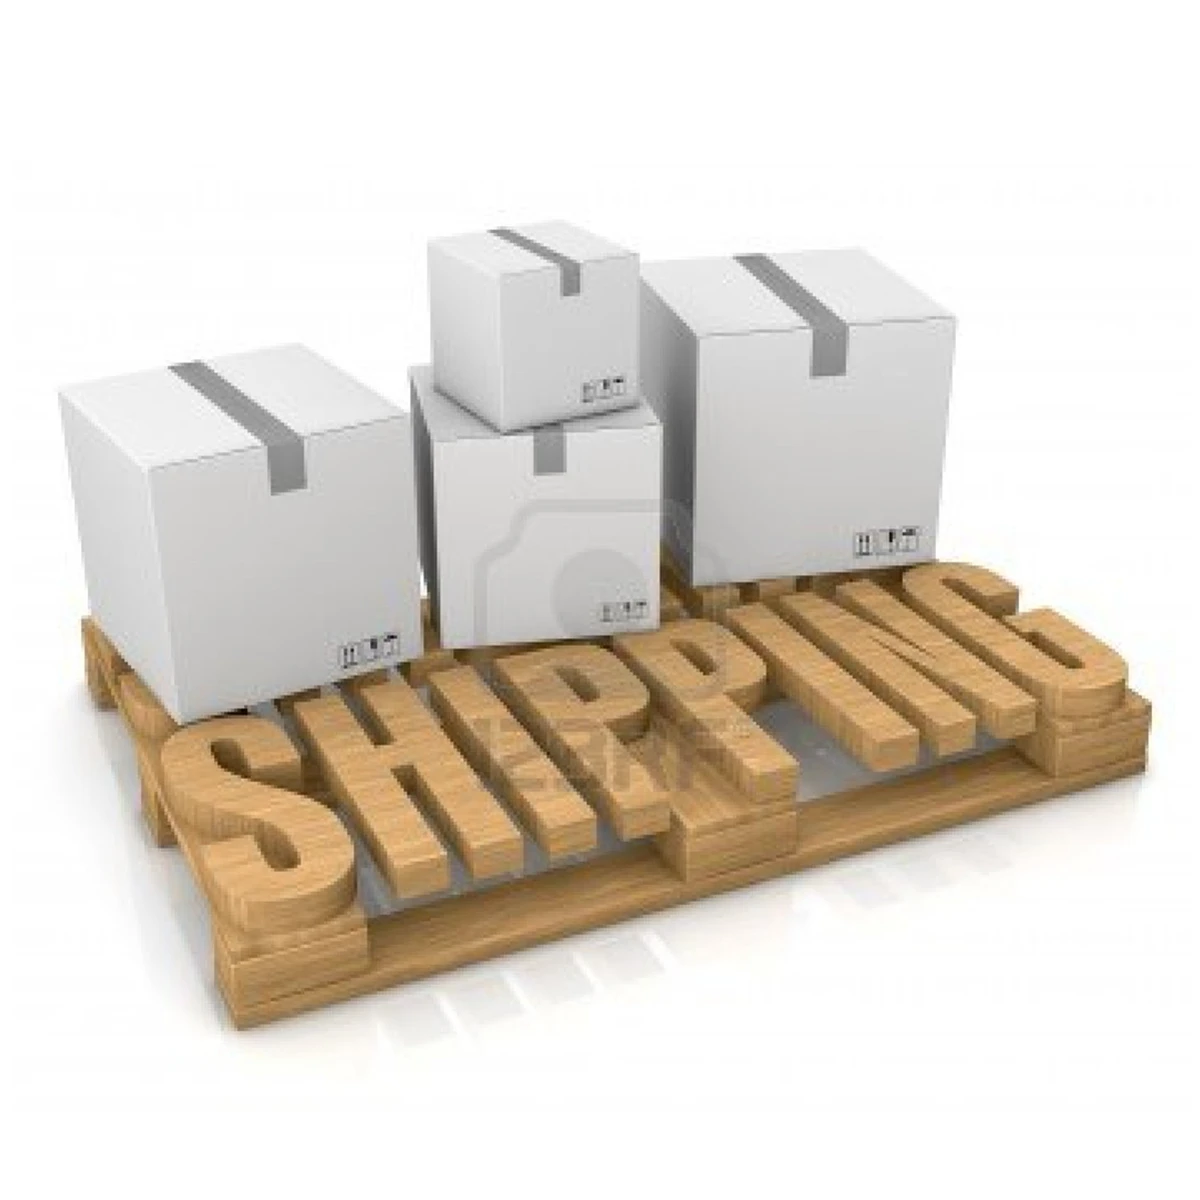 
sea freight with free warehouse storage shipping cost from yiwuwarehouse in china 